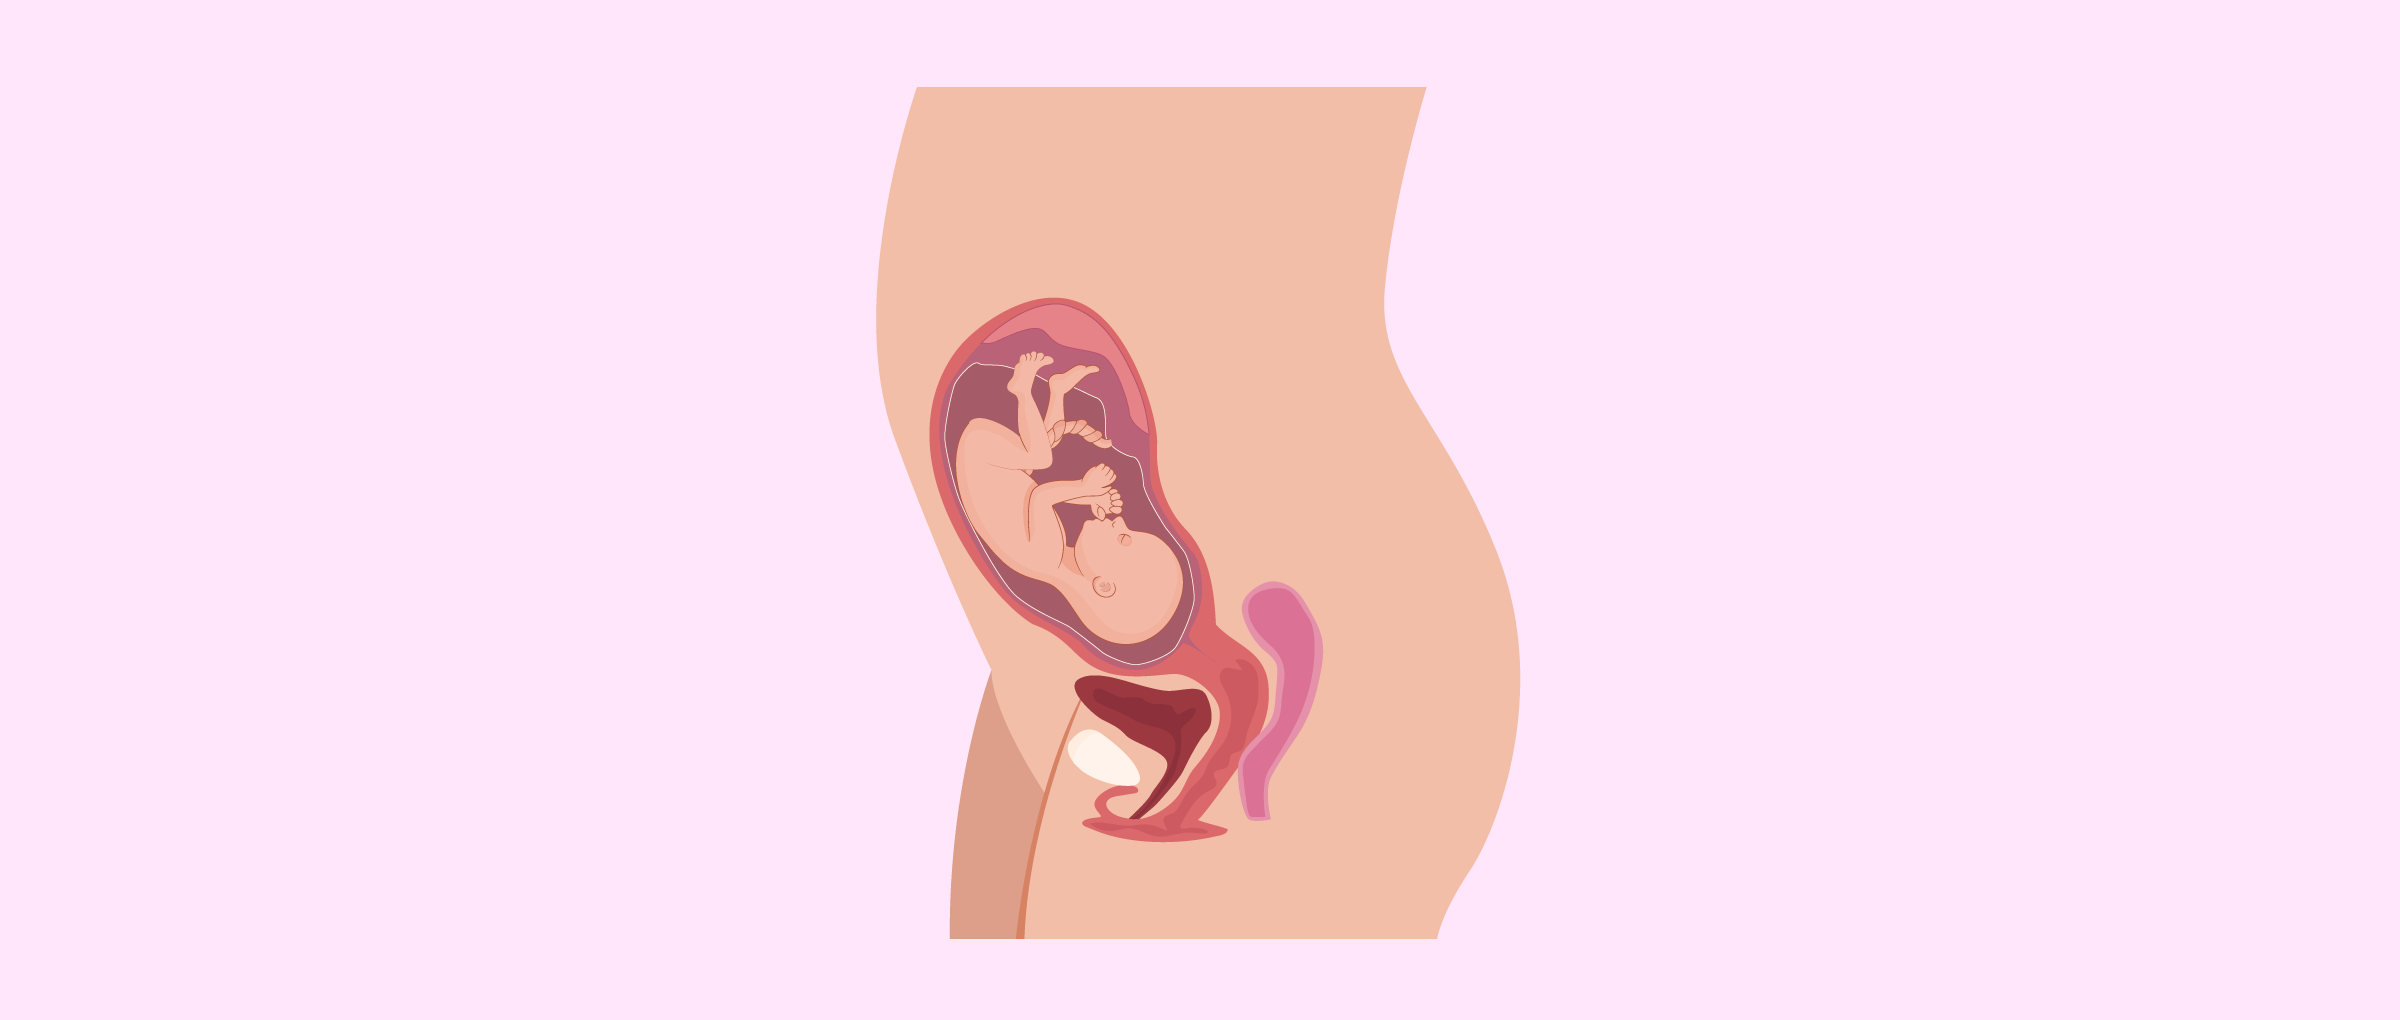 Completely developed fetus at month 7